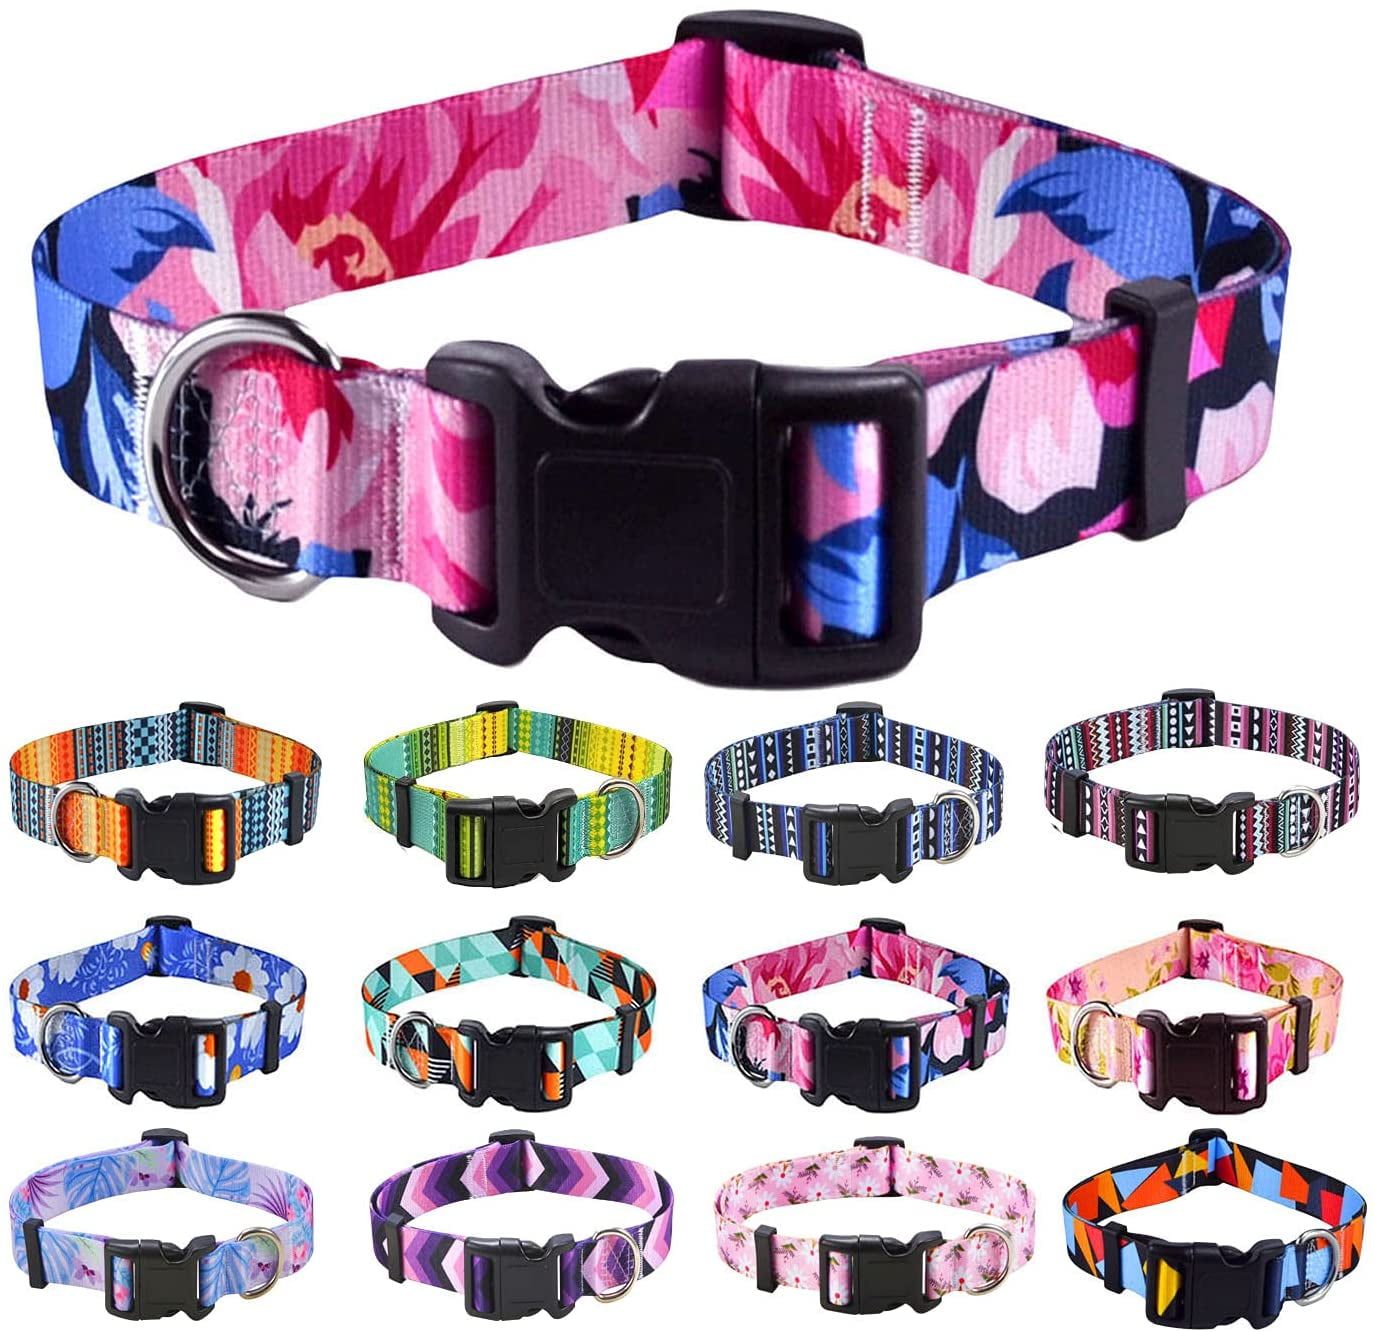 Soft Ethnic Style Collar Adjustable for Small Medium Large Dogs Mihqy Dog Collar with Bohemia Floral Tribal Geometric Patterns